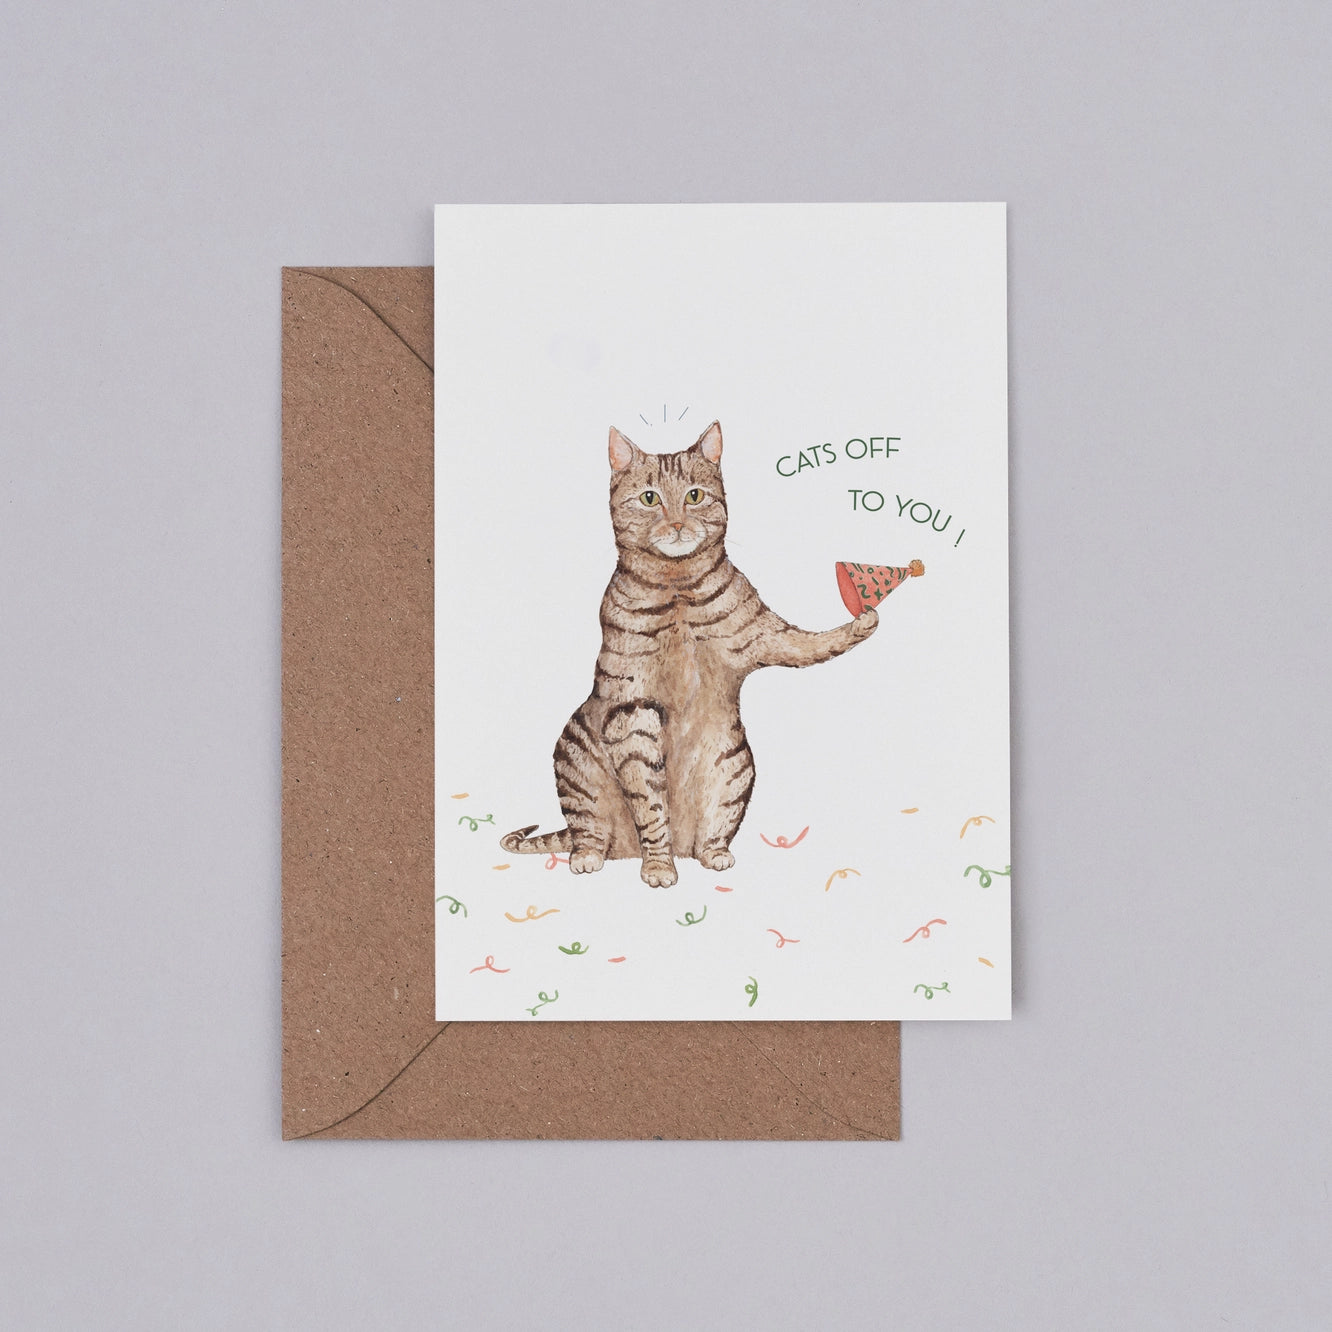 'Cats Off To You' Greetings Card